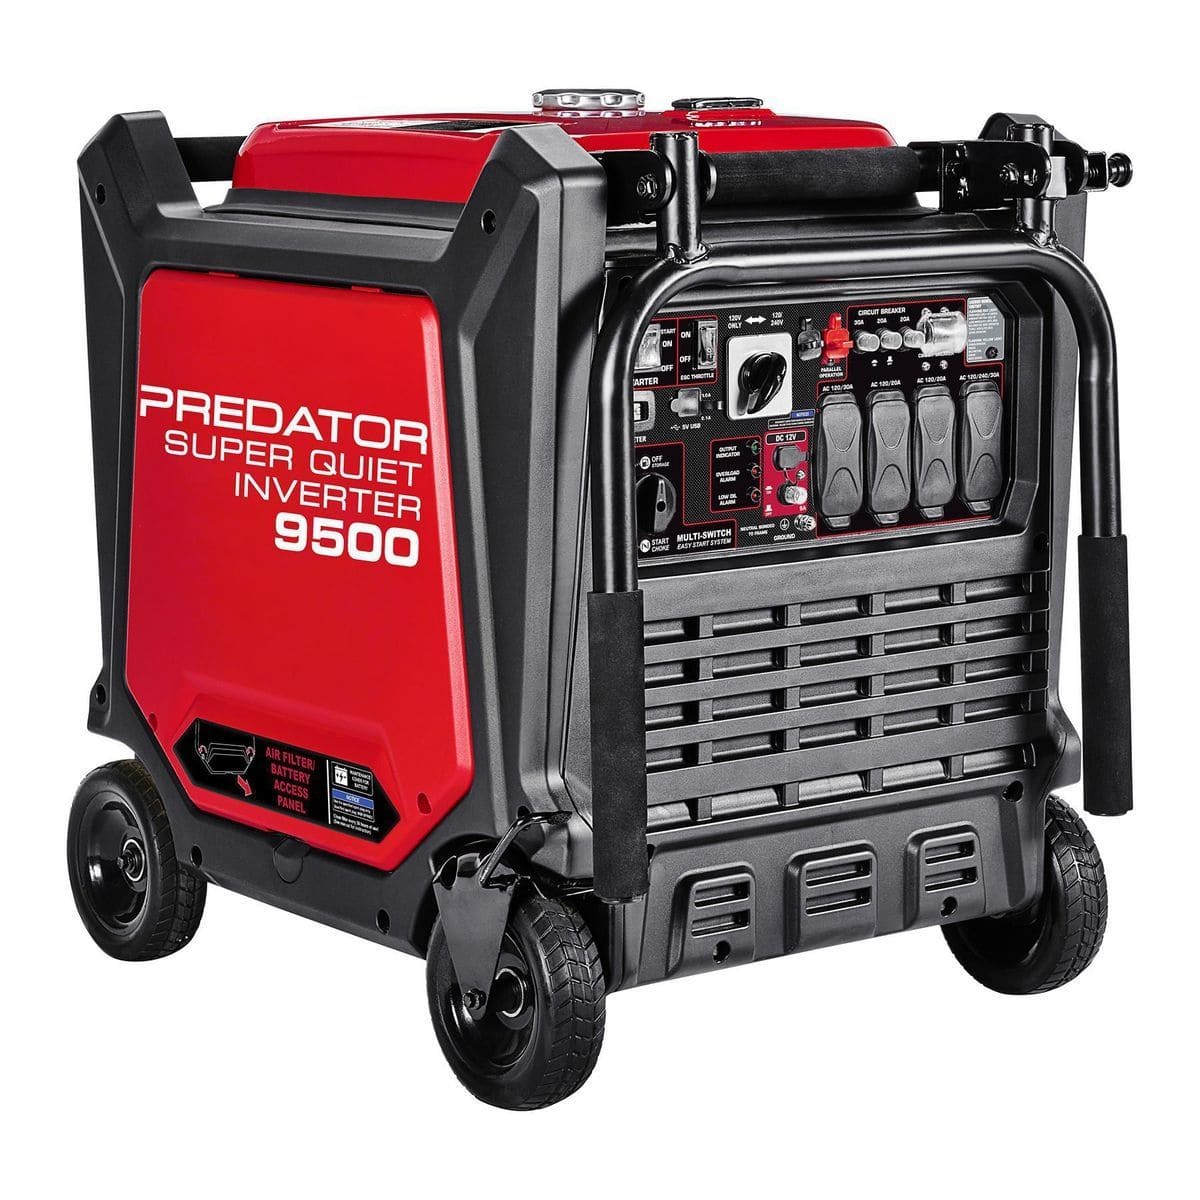 Operation of a portable generator